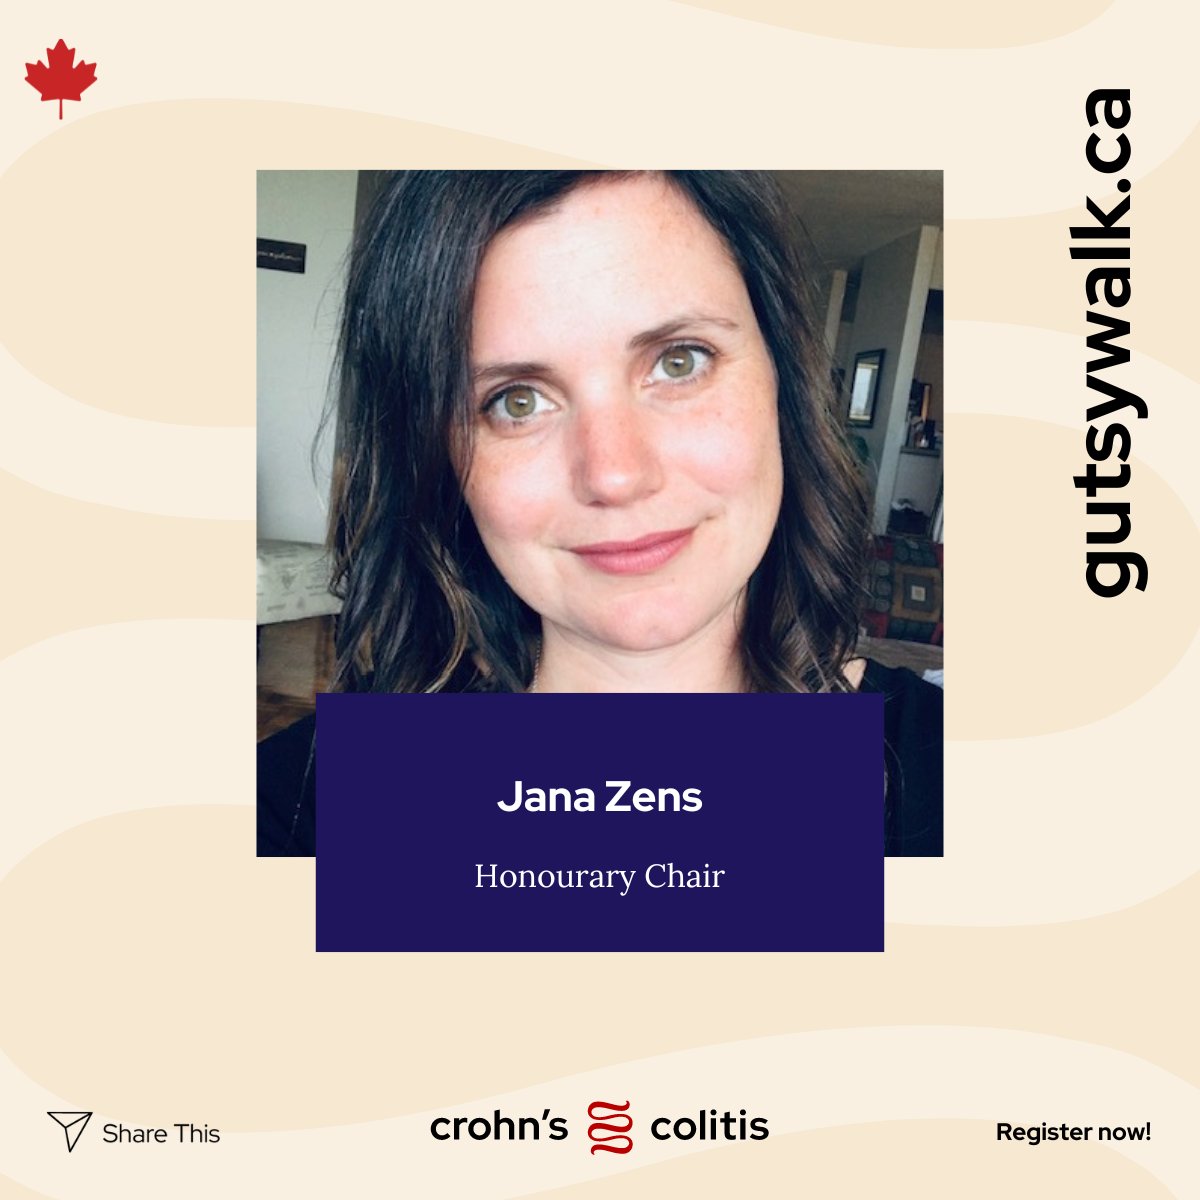 Jana of Winnipeg was 21 years old when she noticed blood in her stool. A year later, she was diagnosed with Crohn's disease and began her involvement with Gutsy Walk almost immediately. Learn more about Jana & why you should join this year’s #gutsywalk: bit.ly/Honourarychairs